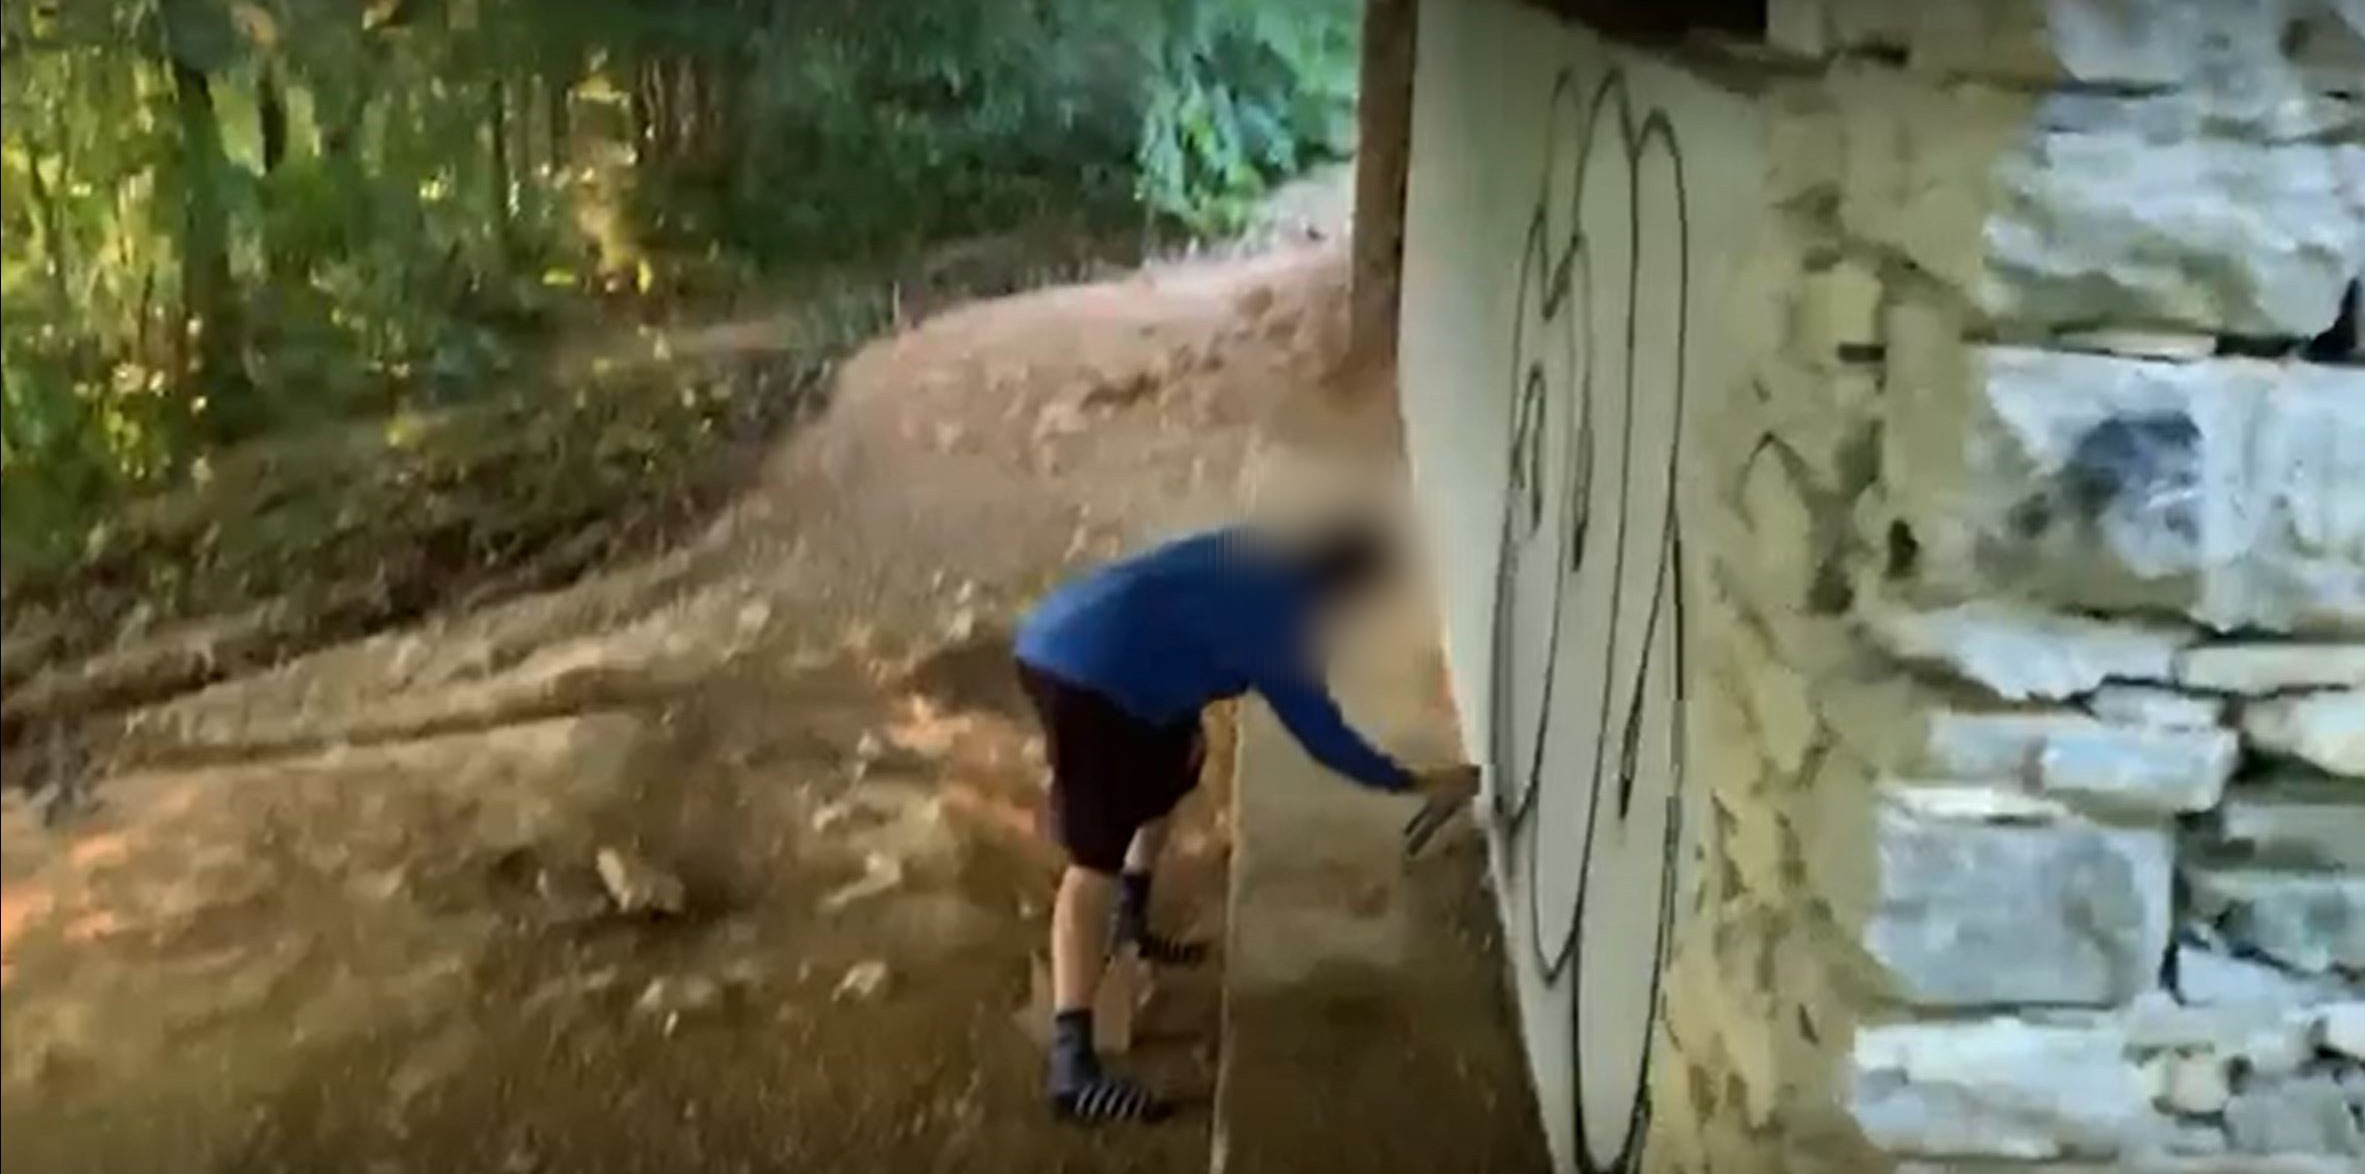 Man in long sleeve blue shirt and dark shorts standing on dirt spray paints a white wall with black lettering.